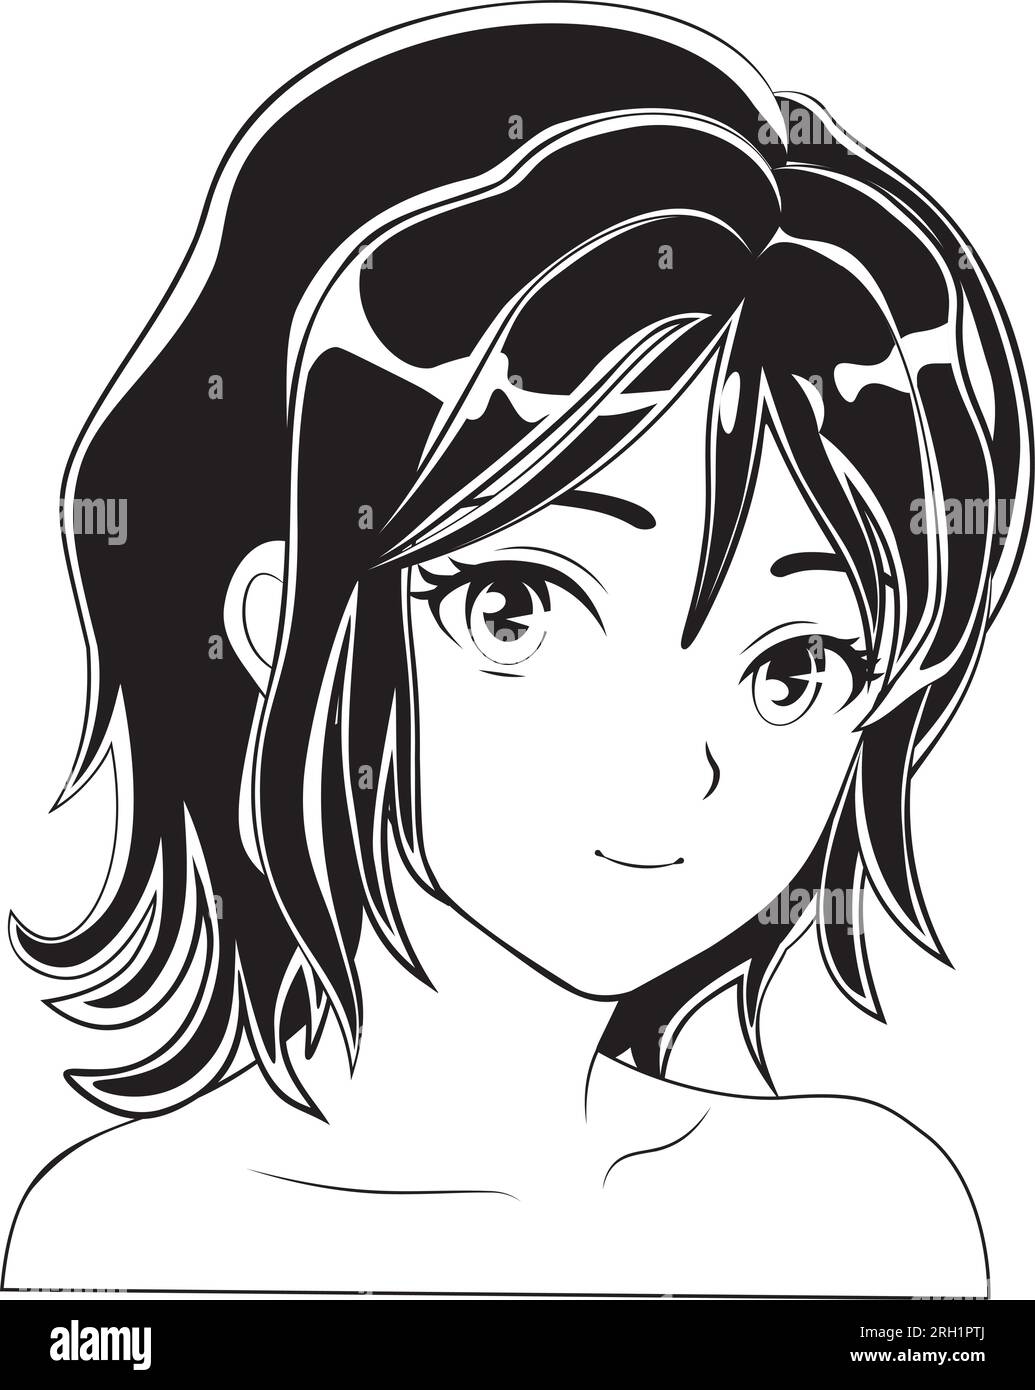 Smiling anime girl portrait in black and white colors. Stock Vector